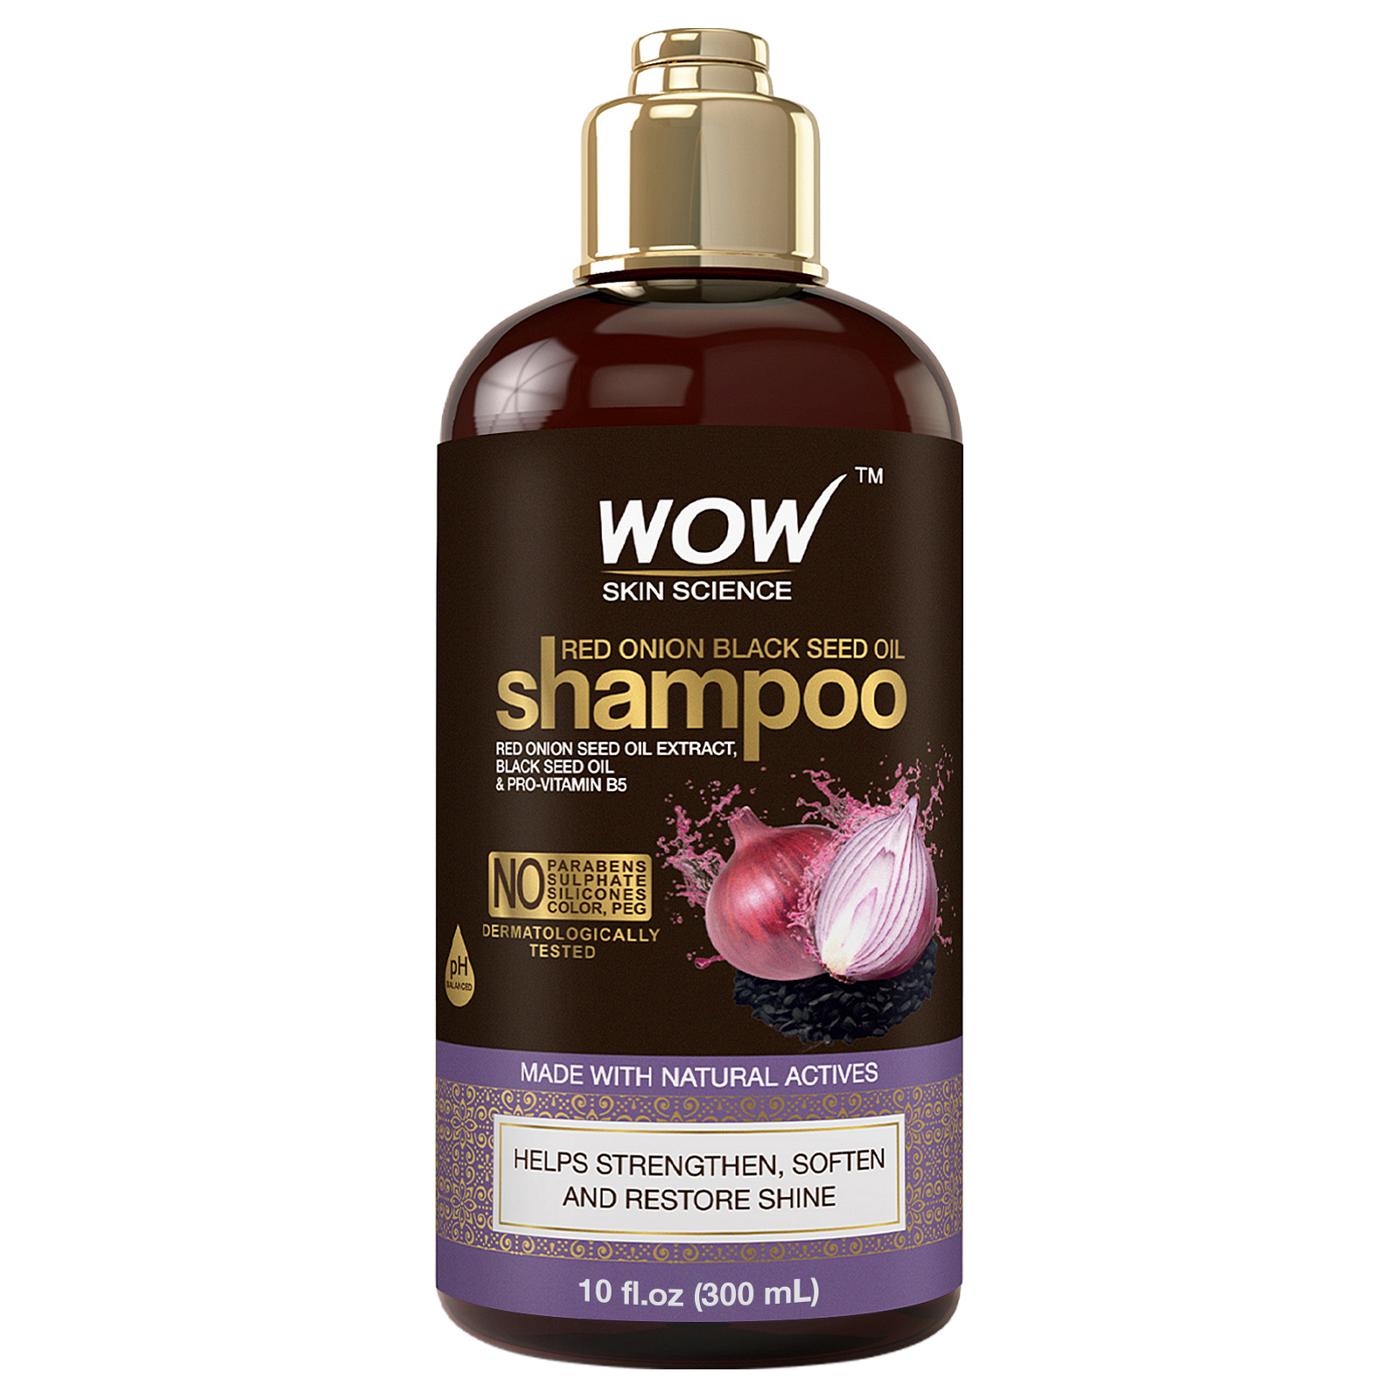 Wow Skin Science Red Onion Black Seed Oil Shampoo; image 1 of 3